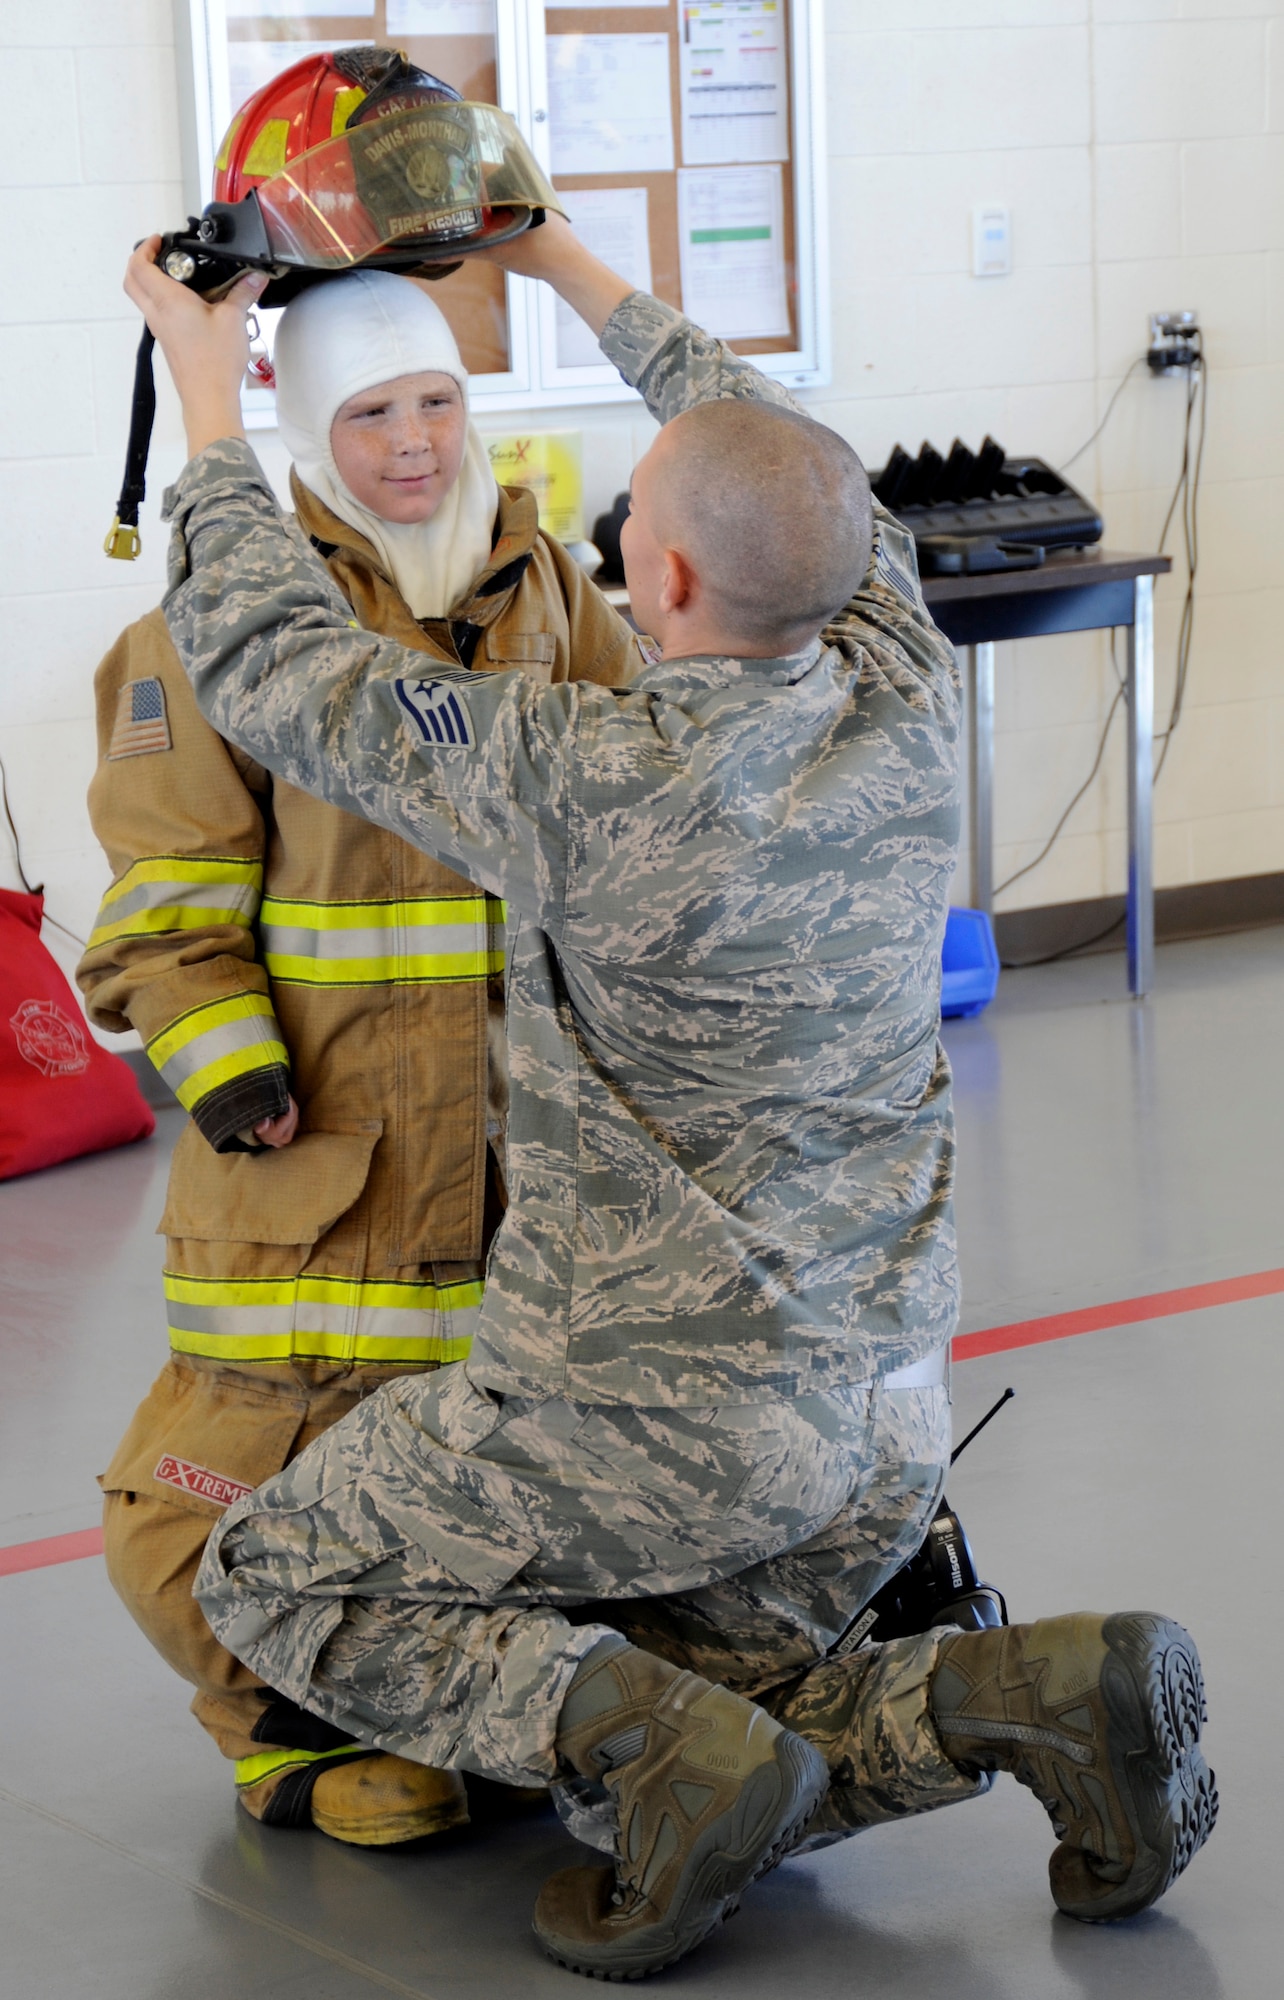 U.S Air Force Staff Sgt. Cole Connors, 355th Civil Engineer Squadron firefighter, assists Larry Ronstadt into fire-fighting personal protective equipment on Oct 25, 2012, during Larry's tour of the base Fire Department, as part of the Pilot for a Day program at Davis-Monthan Air Force Base, Ariz.  Larry was an honorary 357th Fighter Squadron pilot, where he, his father and grandfather toured the squadron, visited an A-10 static and simulator, an HH-60 static and the base Fire Department.  Sergeant Connors is a Firefighter Crew Chief with the base Fire Department. (U.S. Air Force photo by 1LT Susan Harrington/released)